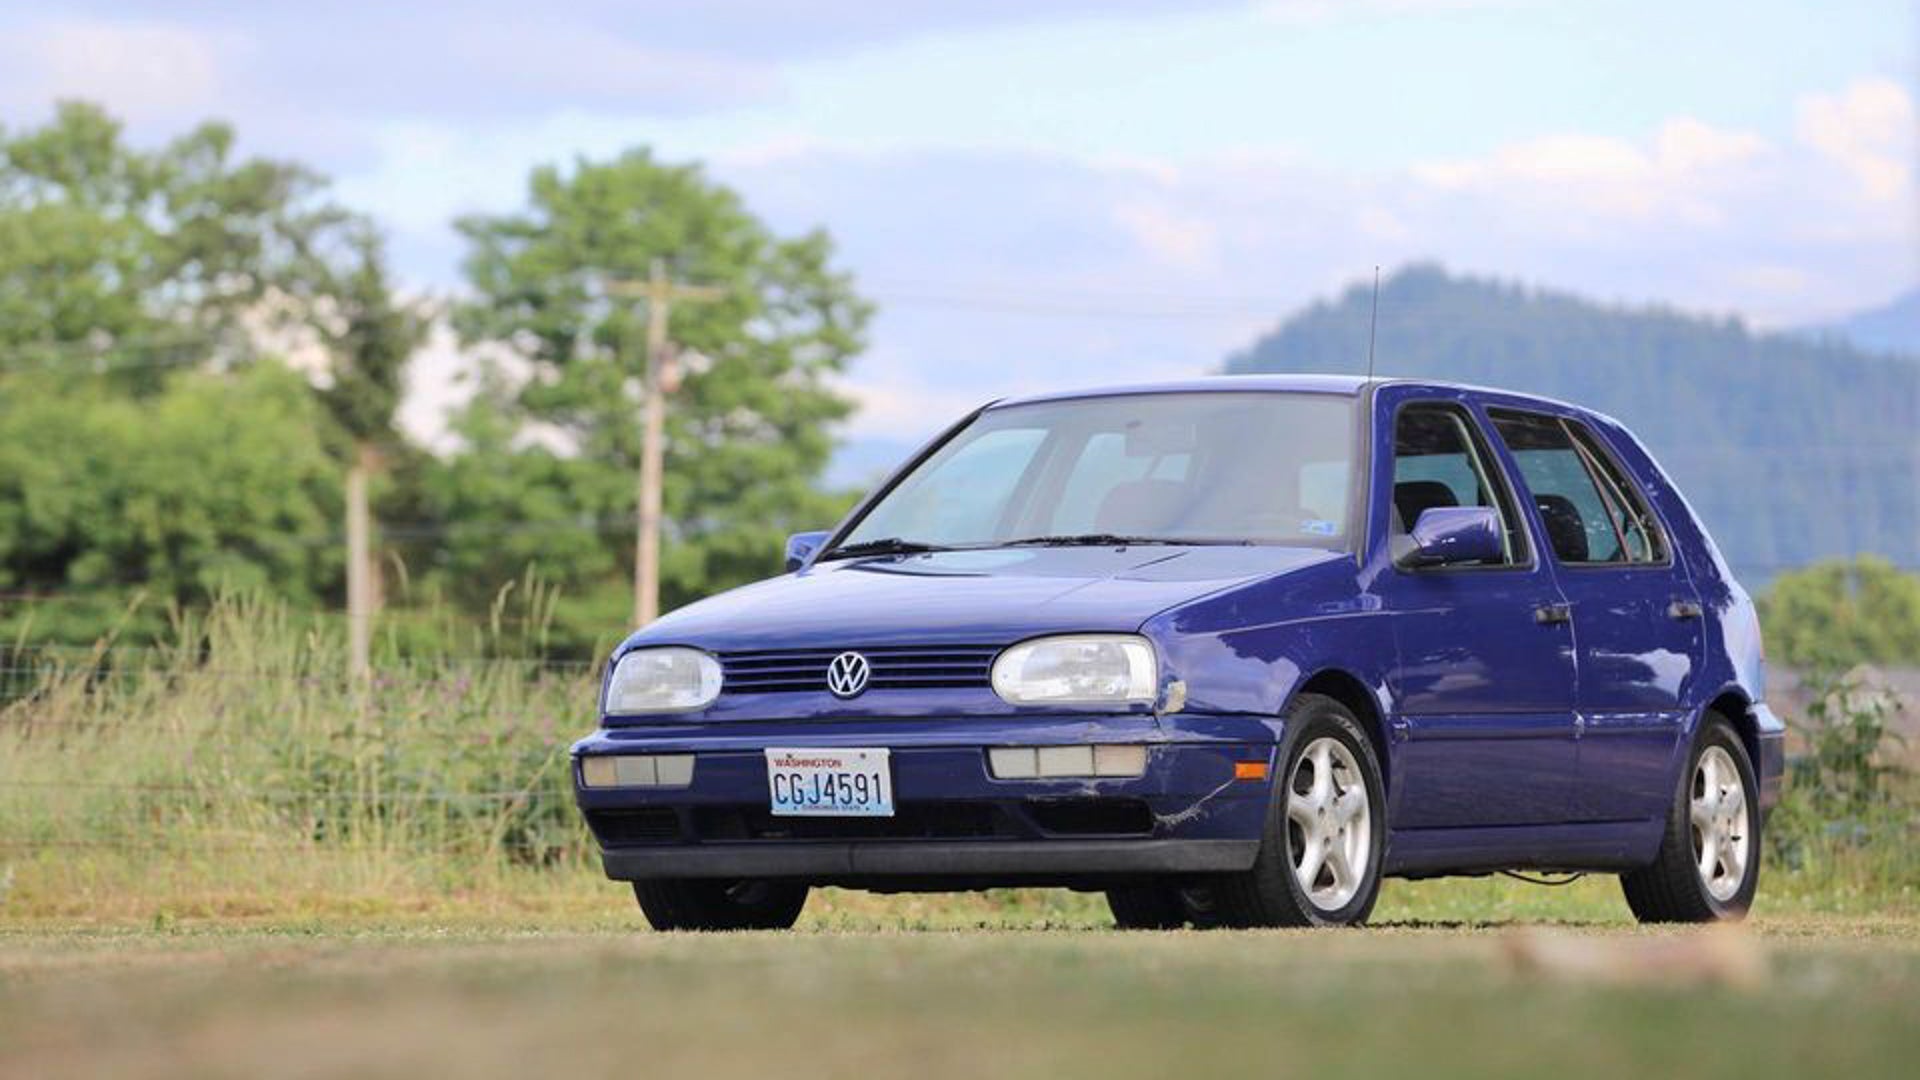 The production of single-color VW Golf Harlequins by the dealer added to the rarity of an already uncommon car.